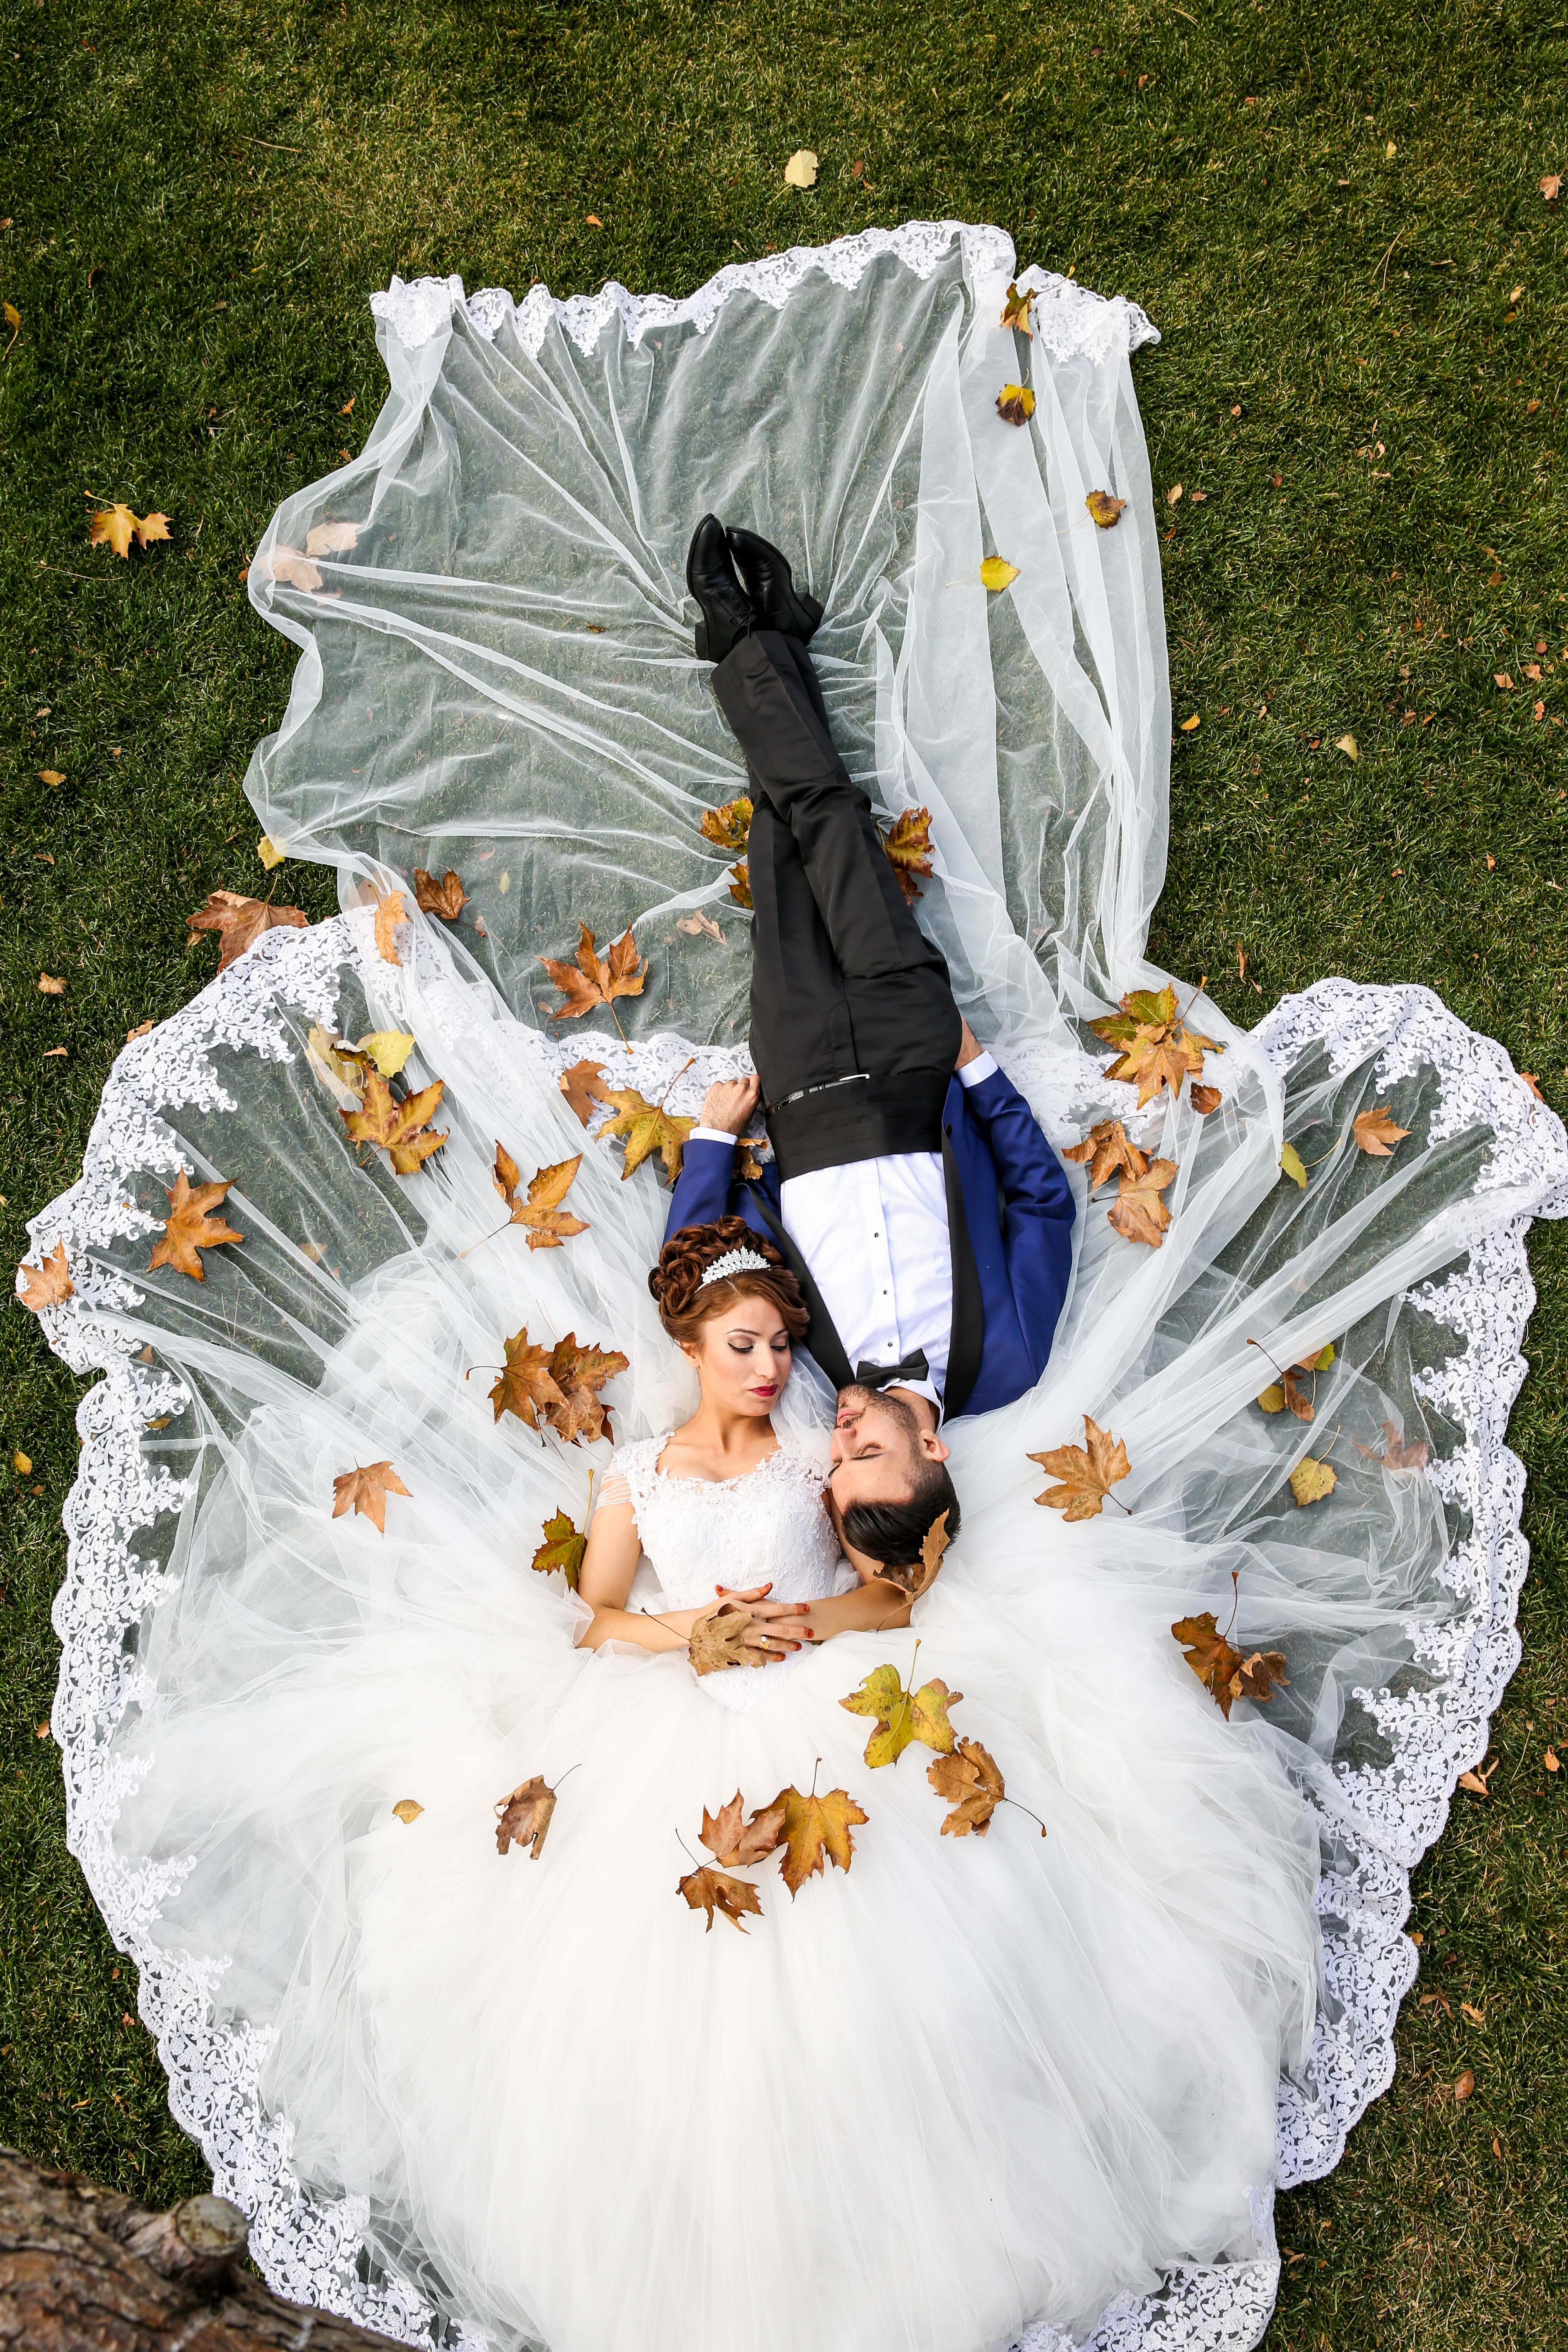 A newlywed couple laying on the grass in the wedding clothes | Source: Pexels